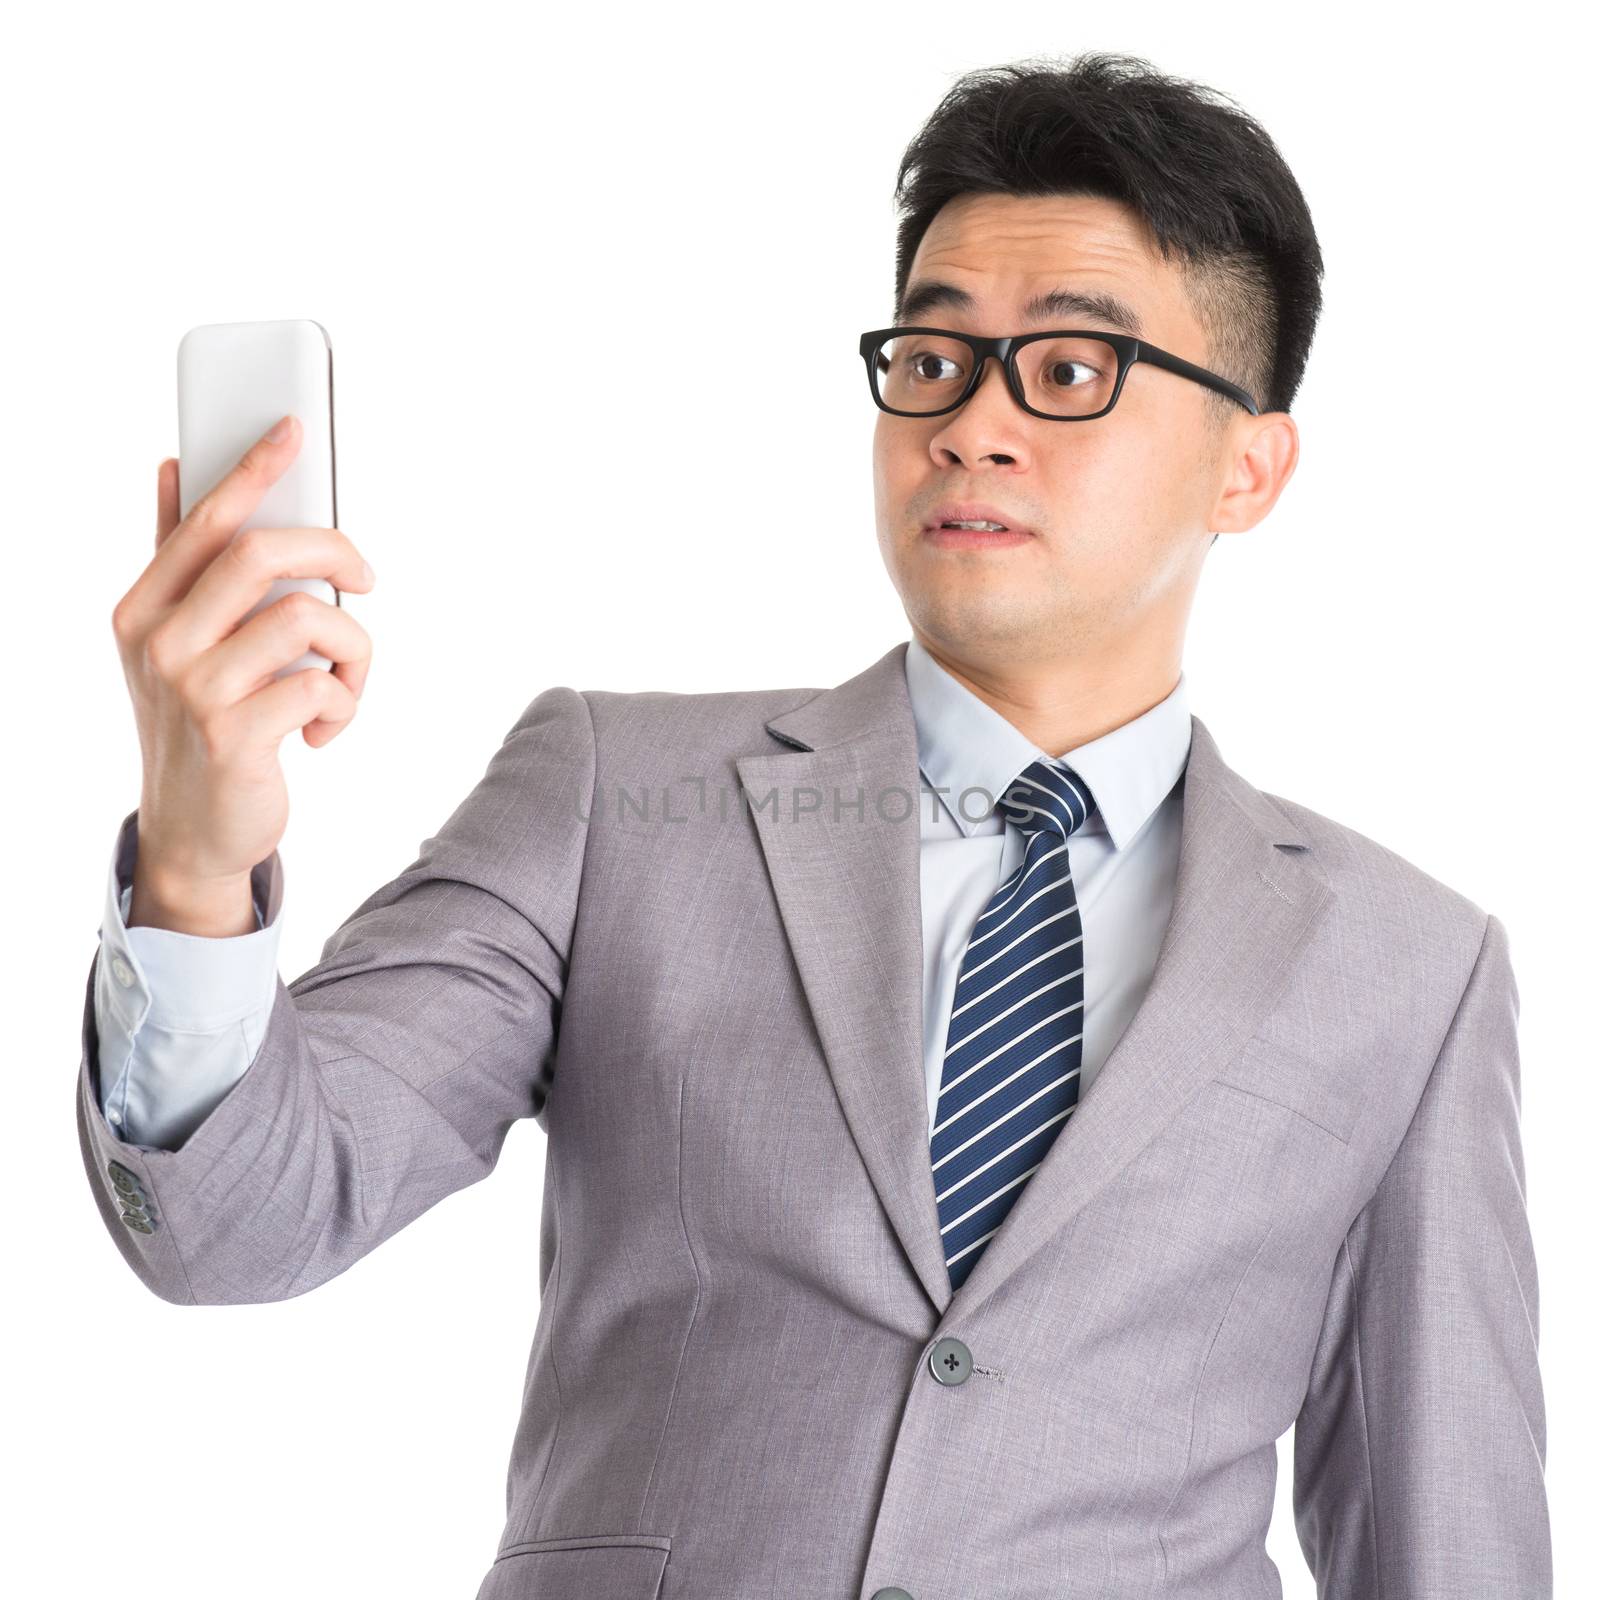 Asian business man with shocked facial expression while looking at smartphone, isolated on white background.